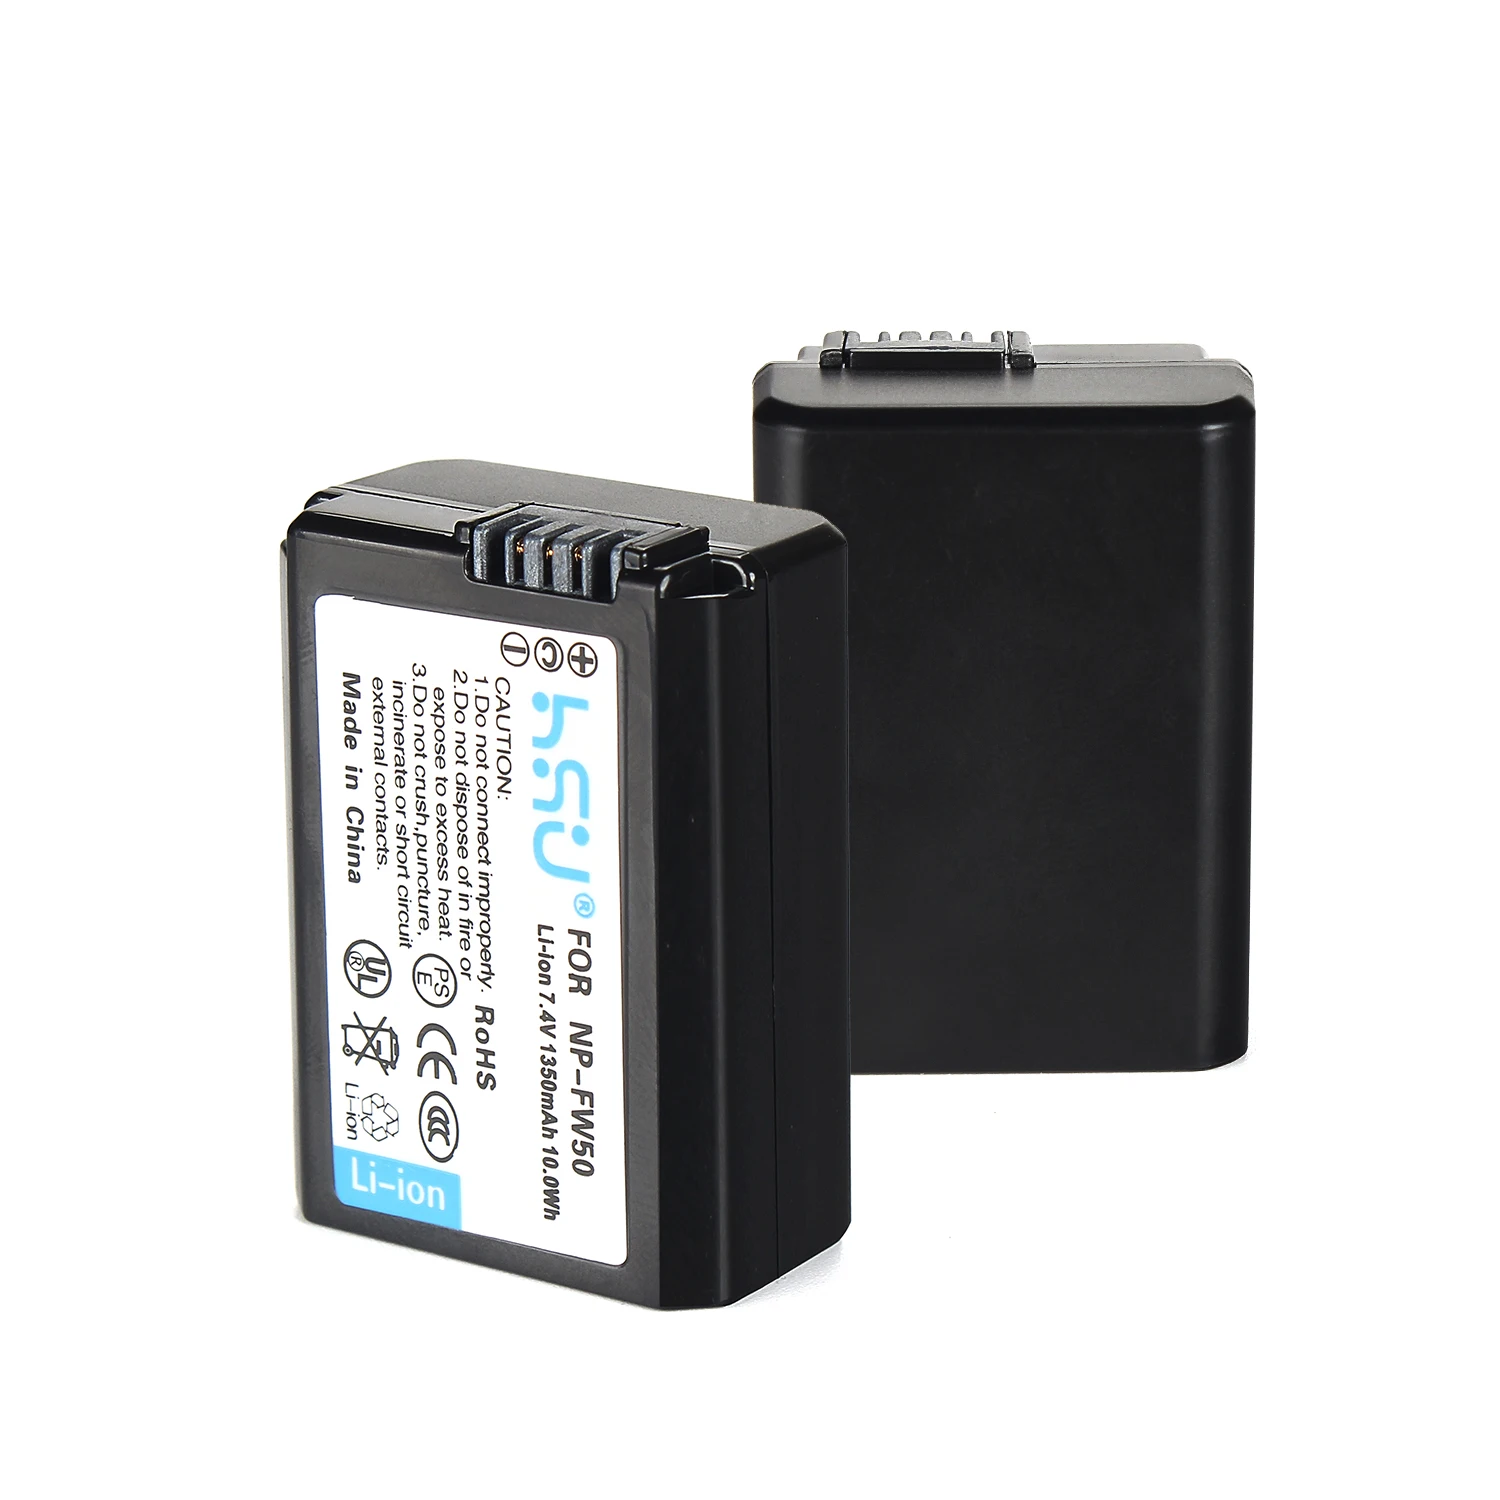 

NP-FW50 1500mAh Rechargeable Battery for Sony Alpha 7 a7 7R a7R 7S a7S a3000 a5000 a6000 NE 5N 5C A55 Camera